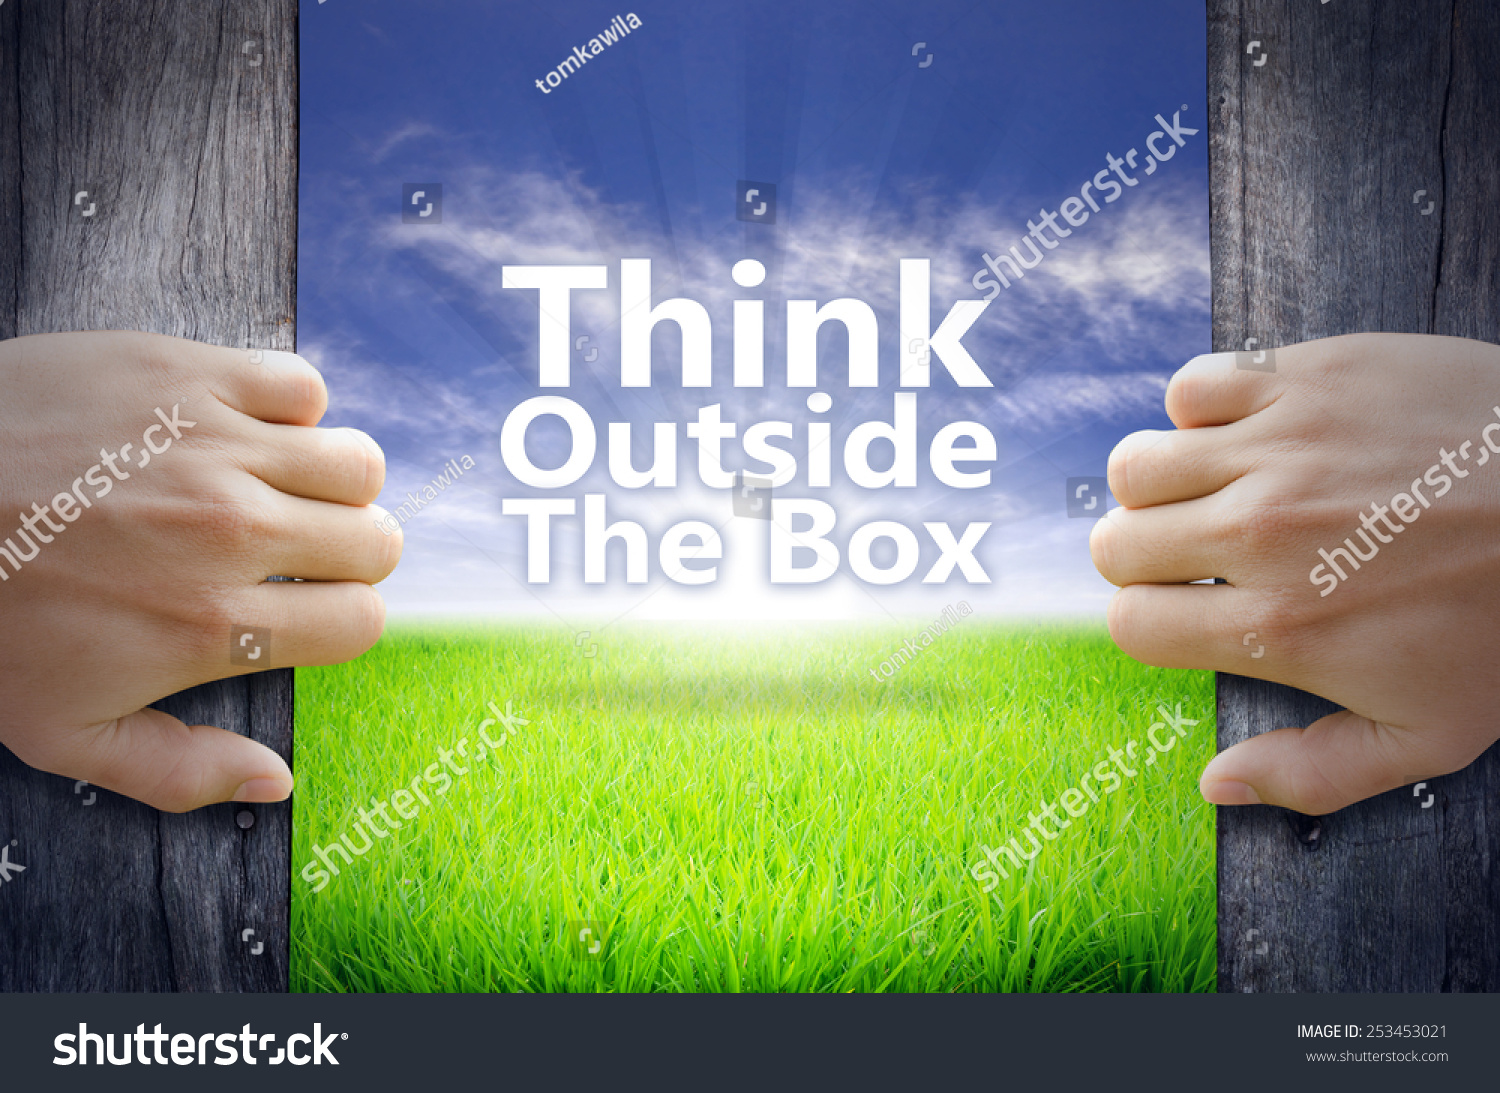 "Think Outside The Box" Motivational Quotes. Hands Opening A Wooden